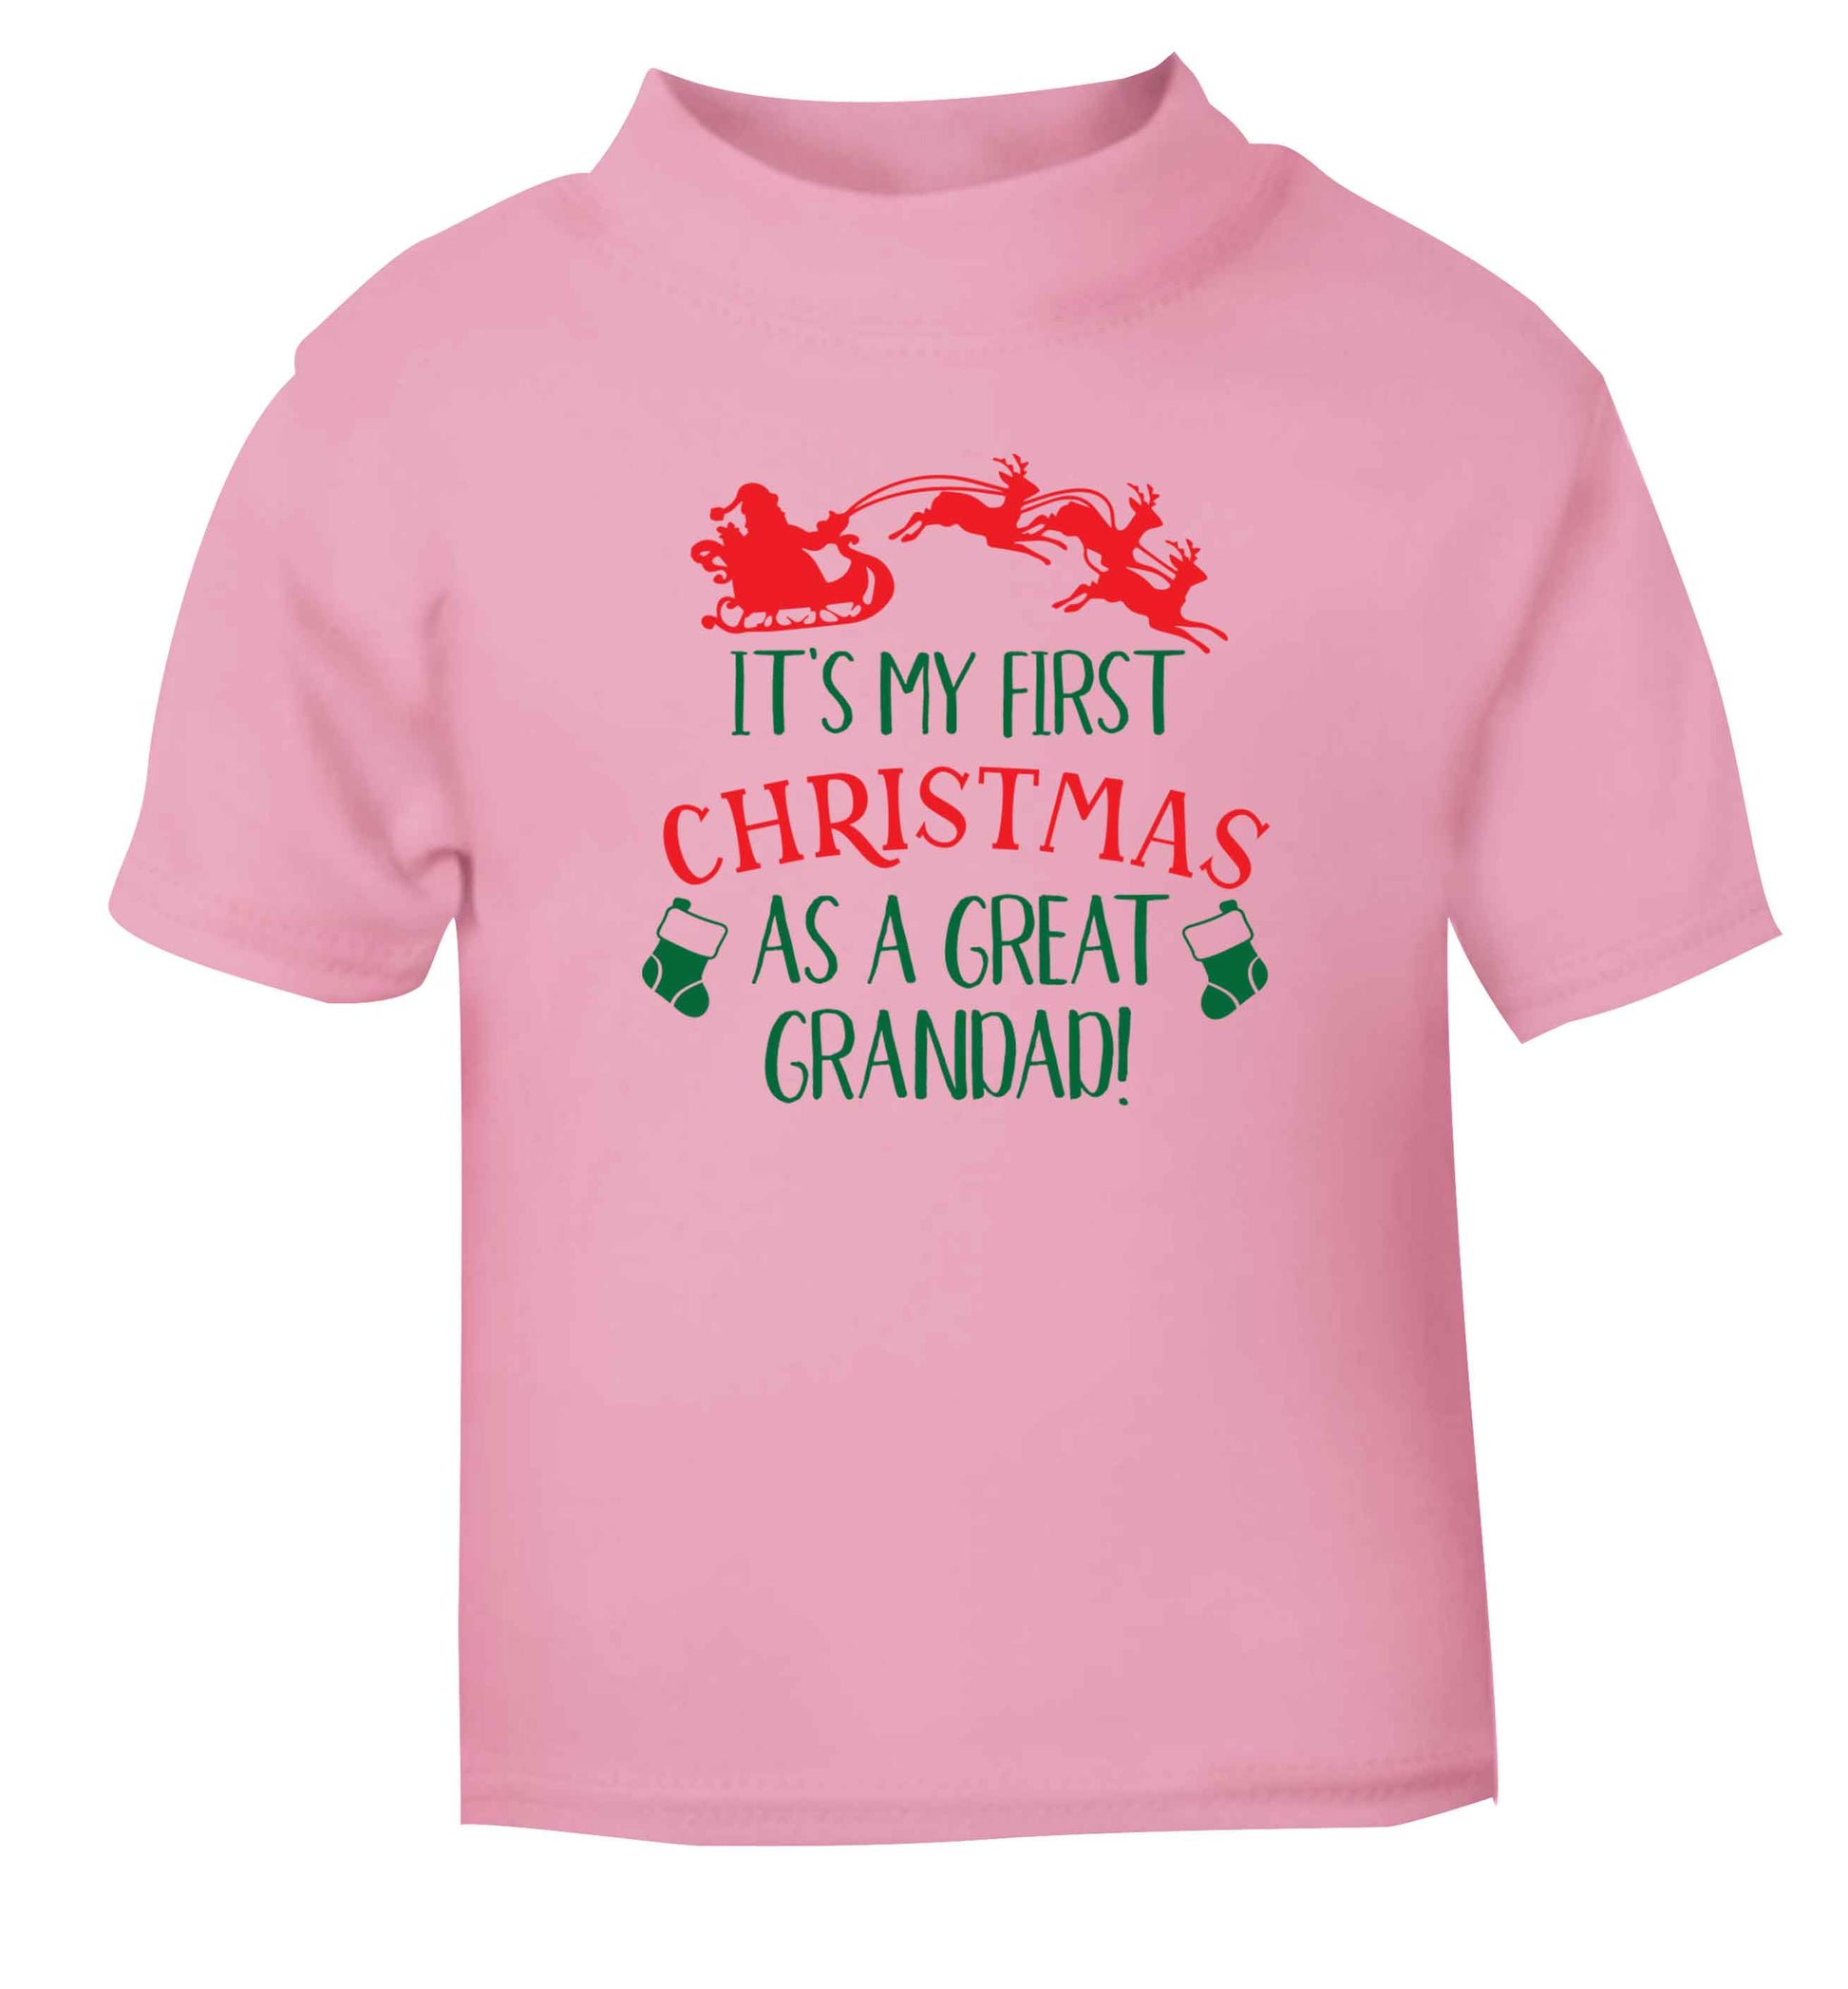 It's my first Christmas as a great grandad! light pink Baby Toddler Tshirt 2 Years